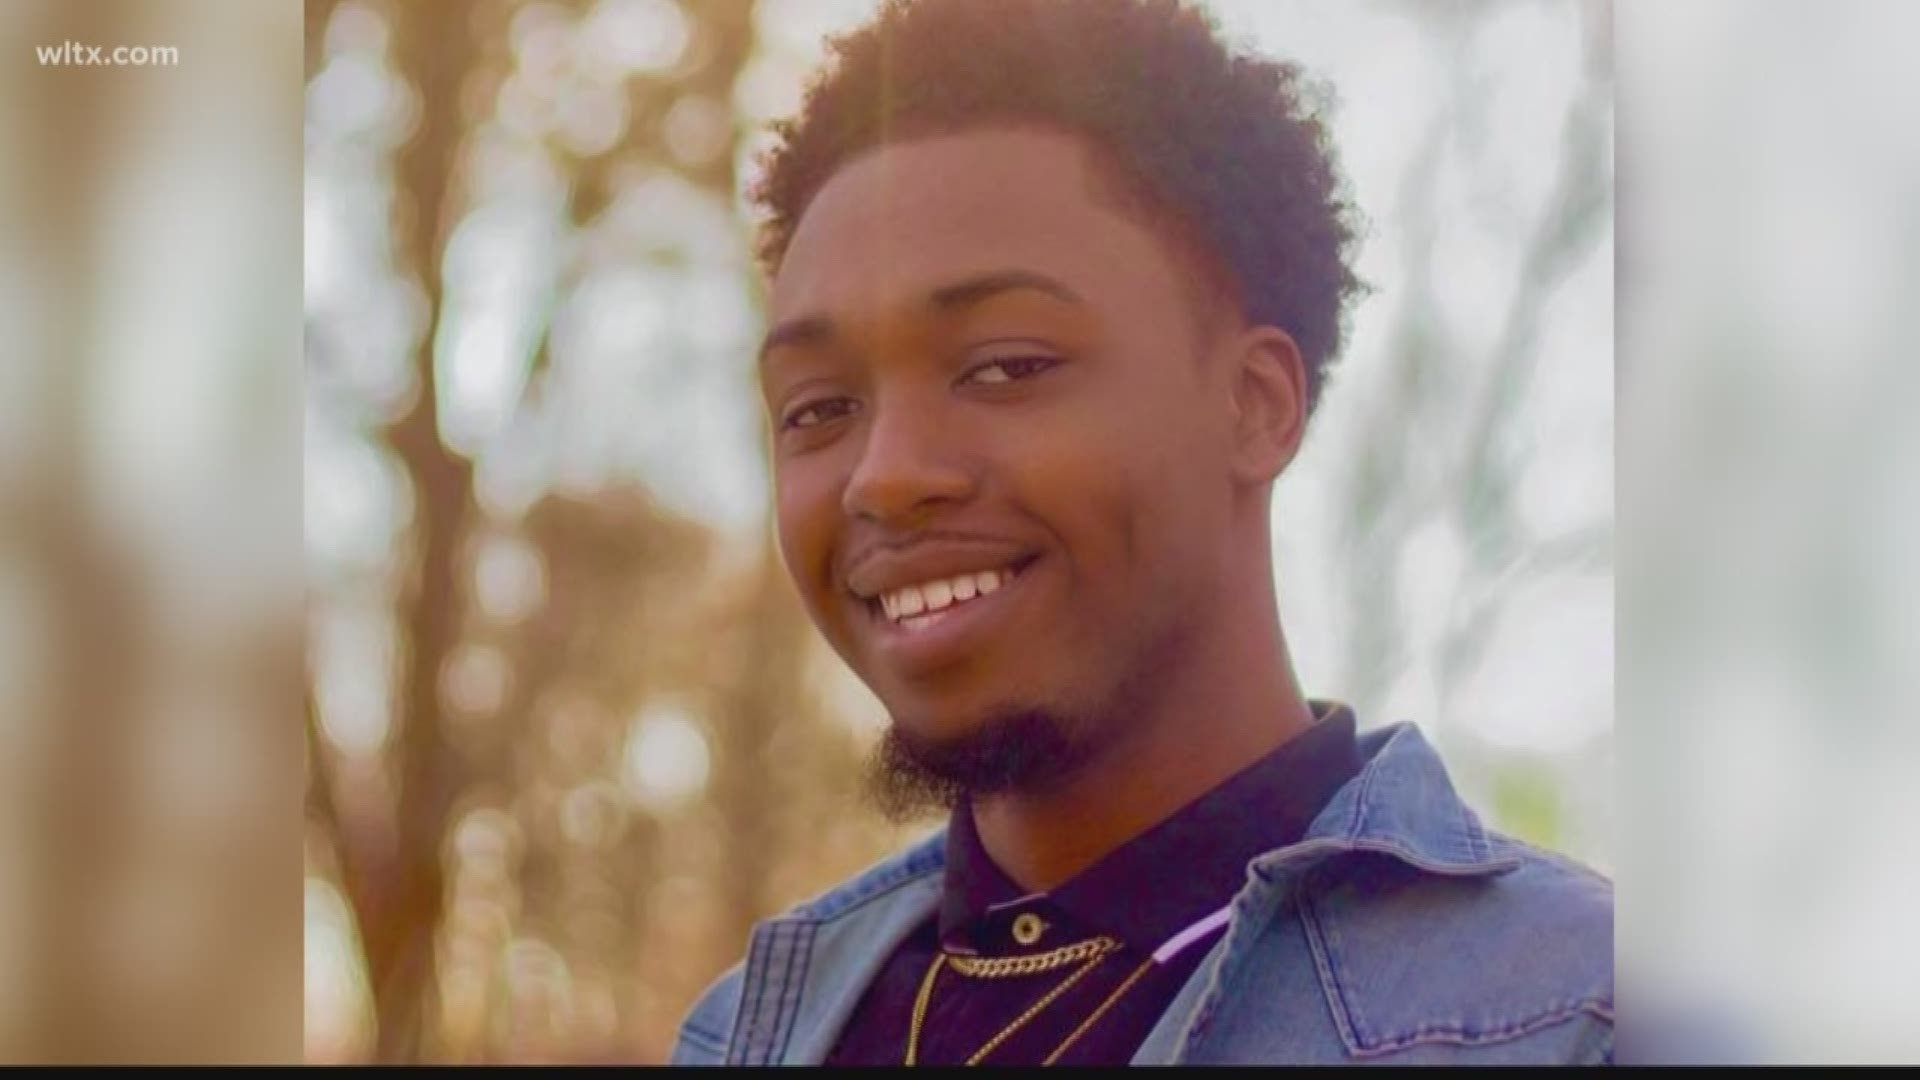 The three victims from last weekend's shooting in Five Points are still recovering.	Kidron Deal underwent his second surgery Wednesday and has been taken off the ventilator -- after he was hit in the face by a bullet.